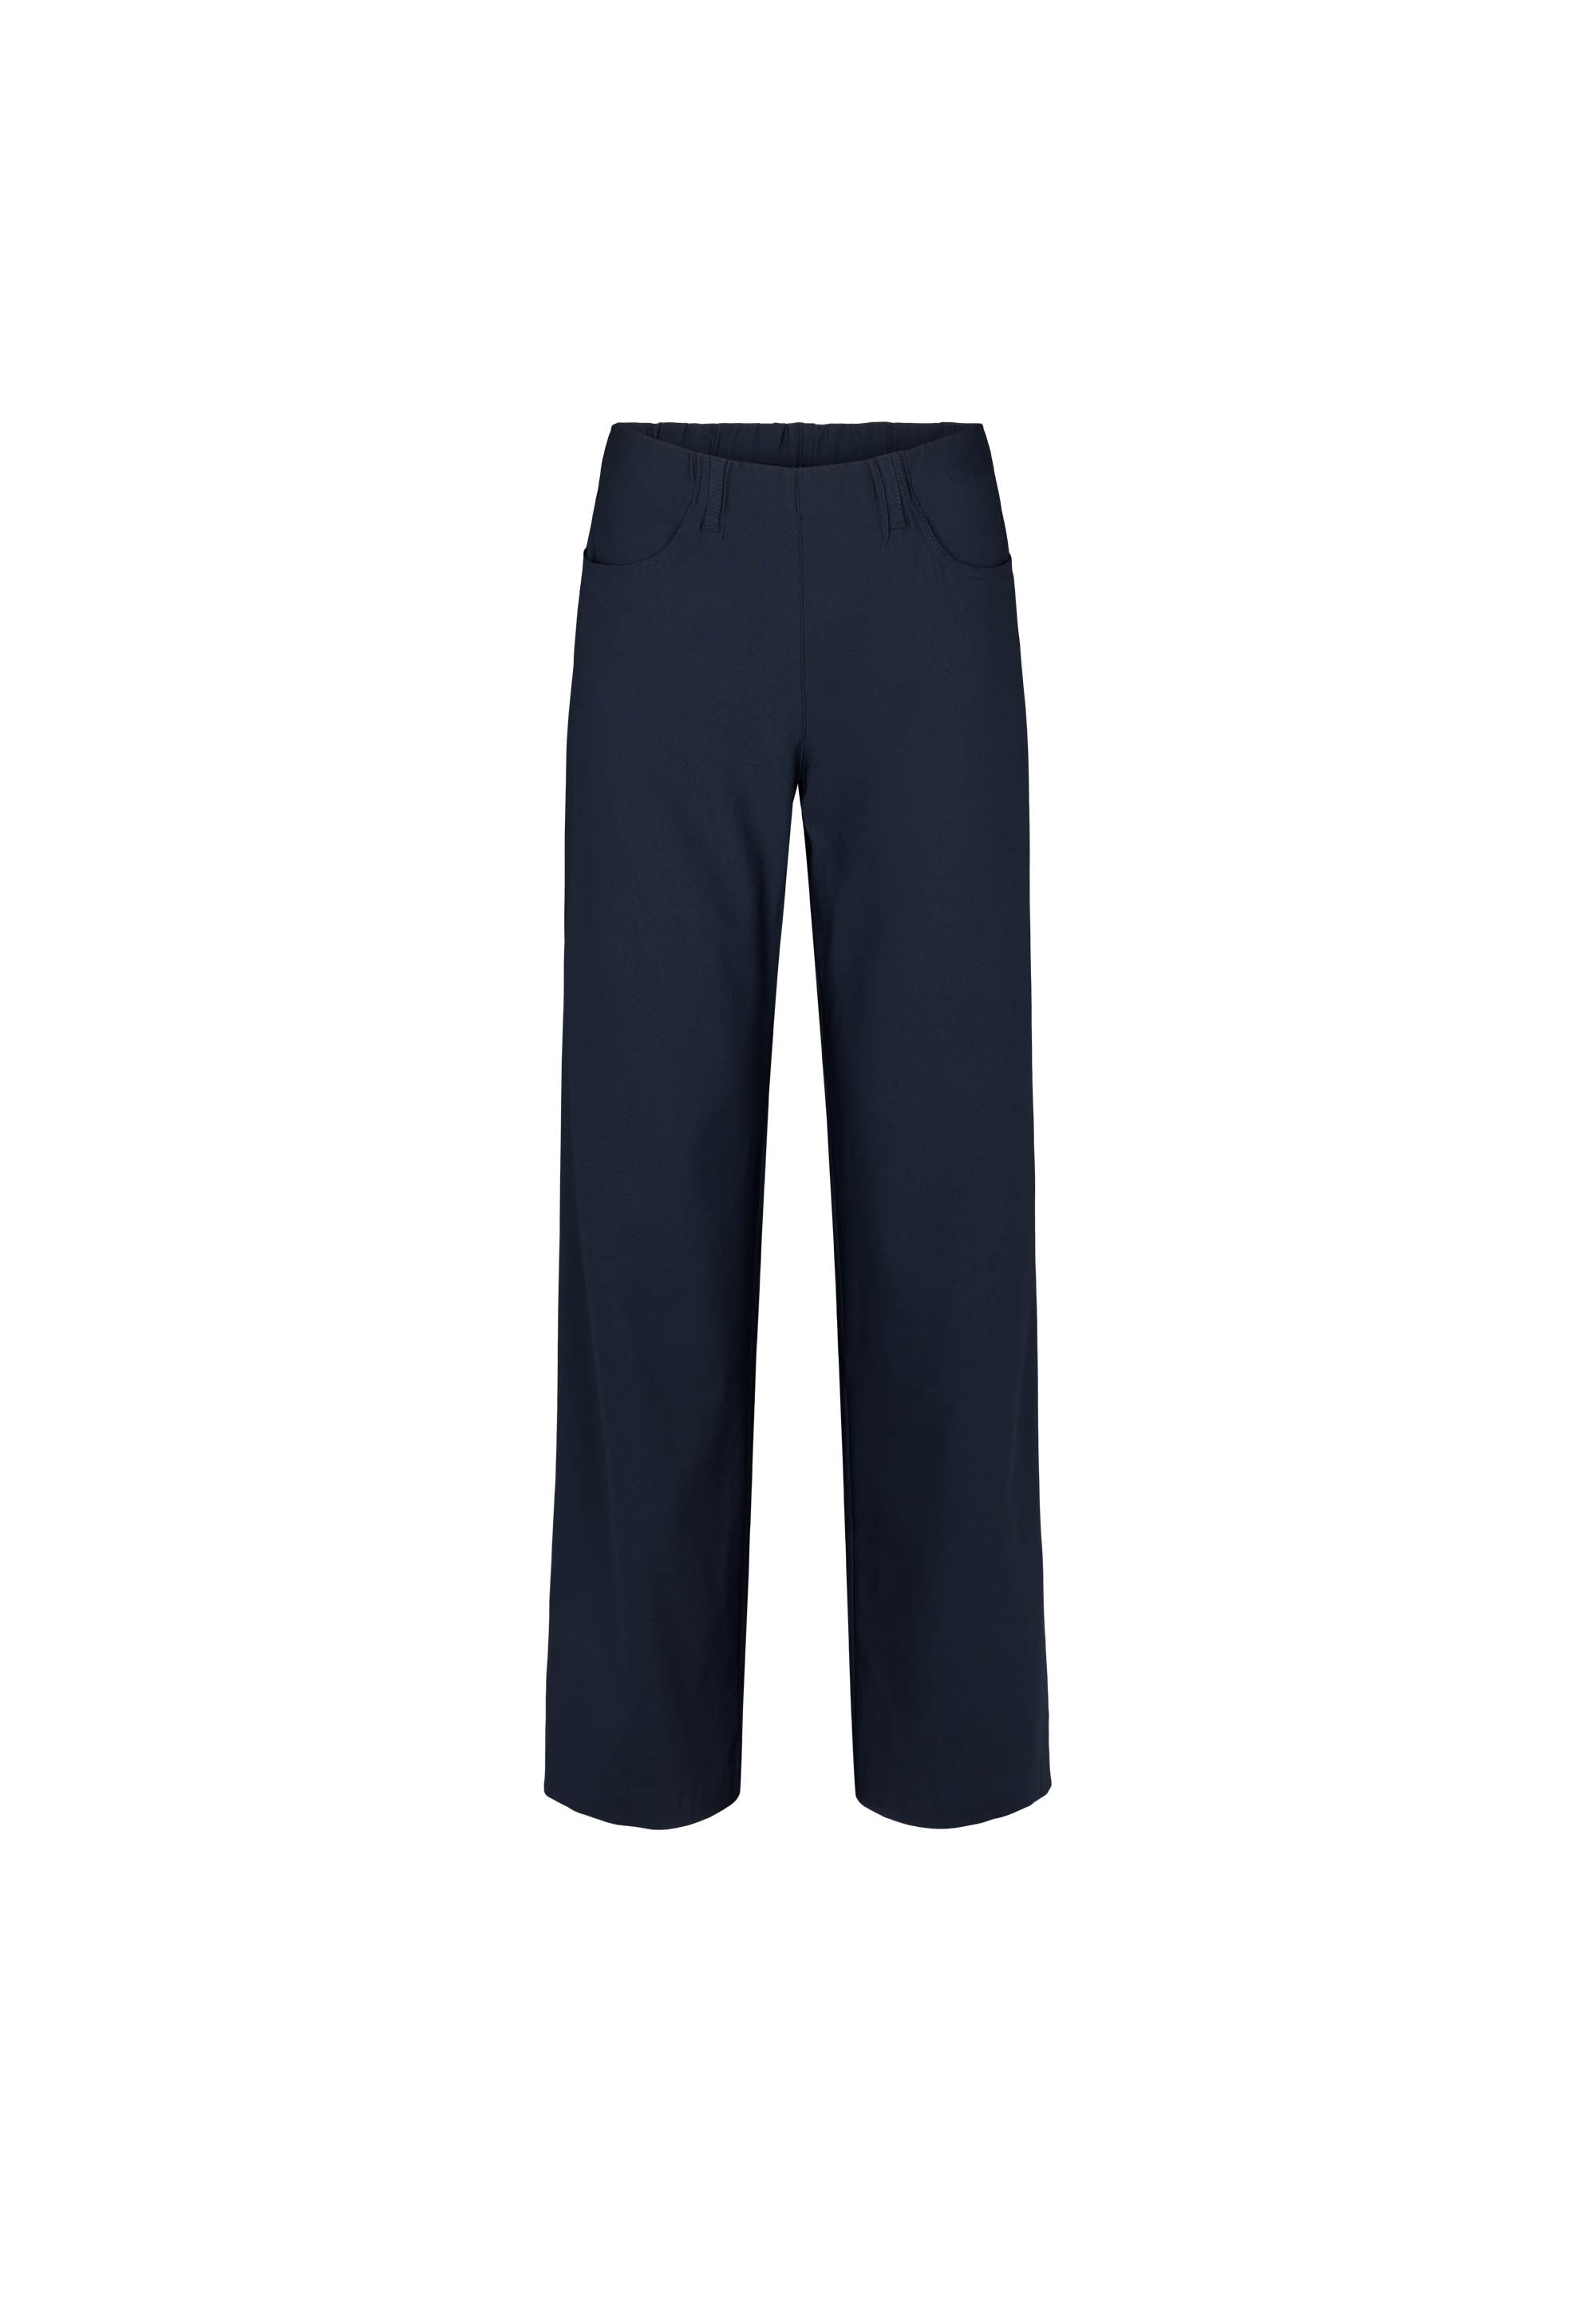 LAURIE Donna Loose - Medium Length Trousers LOOSE Marine